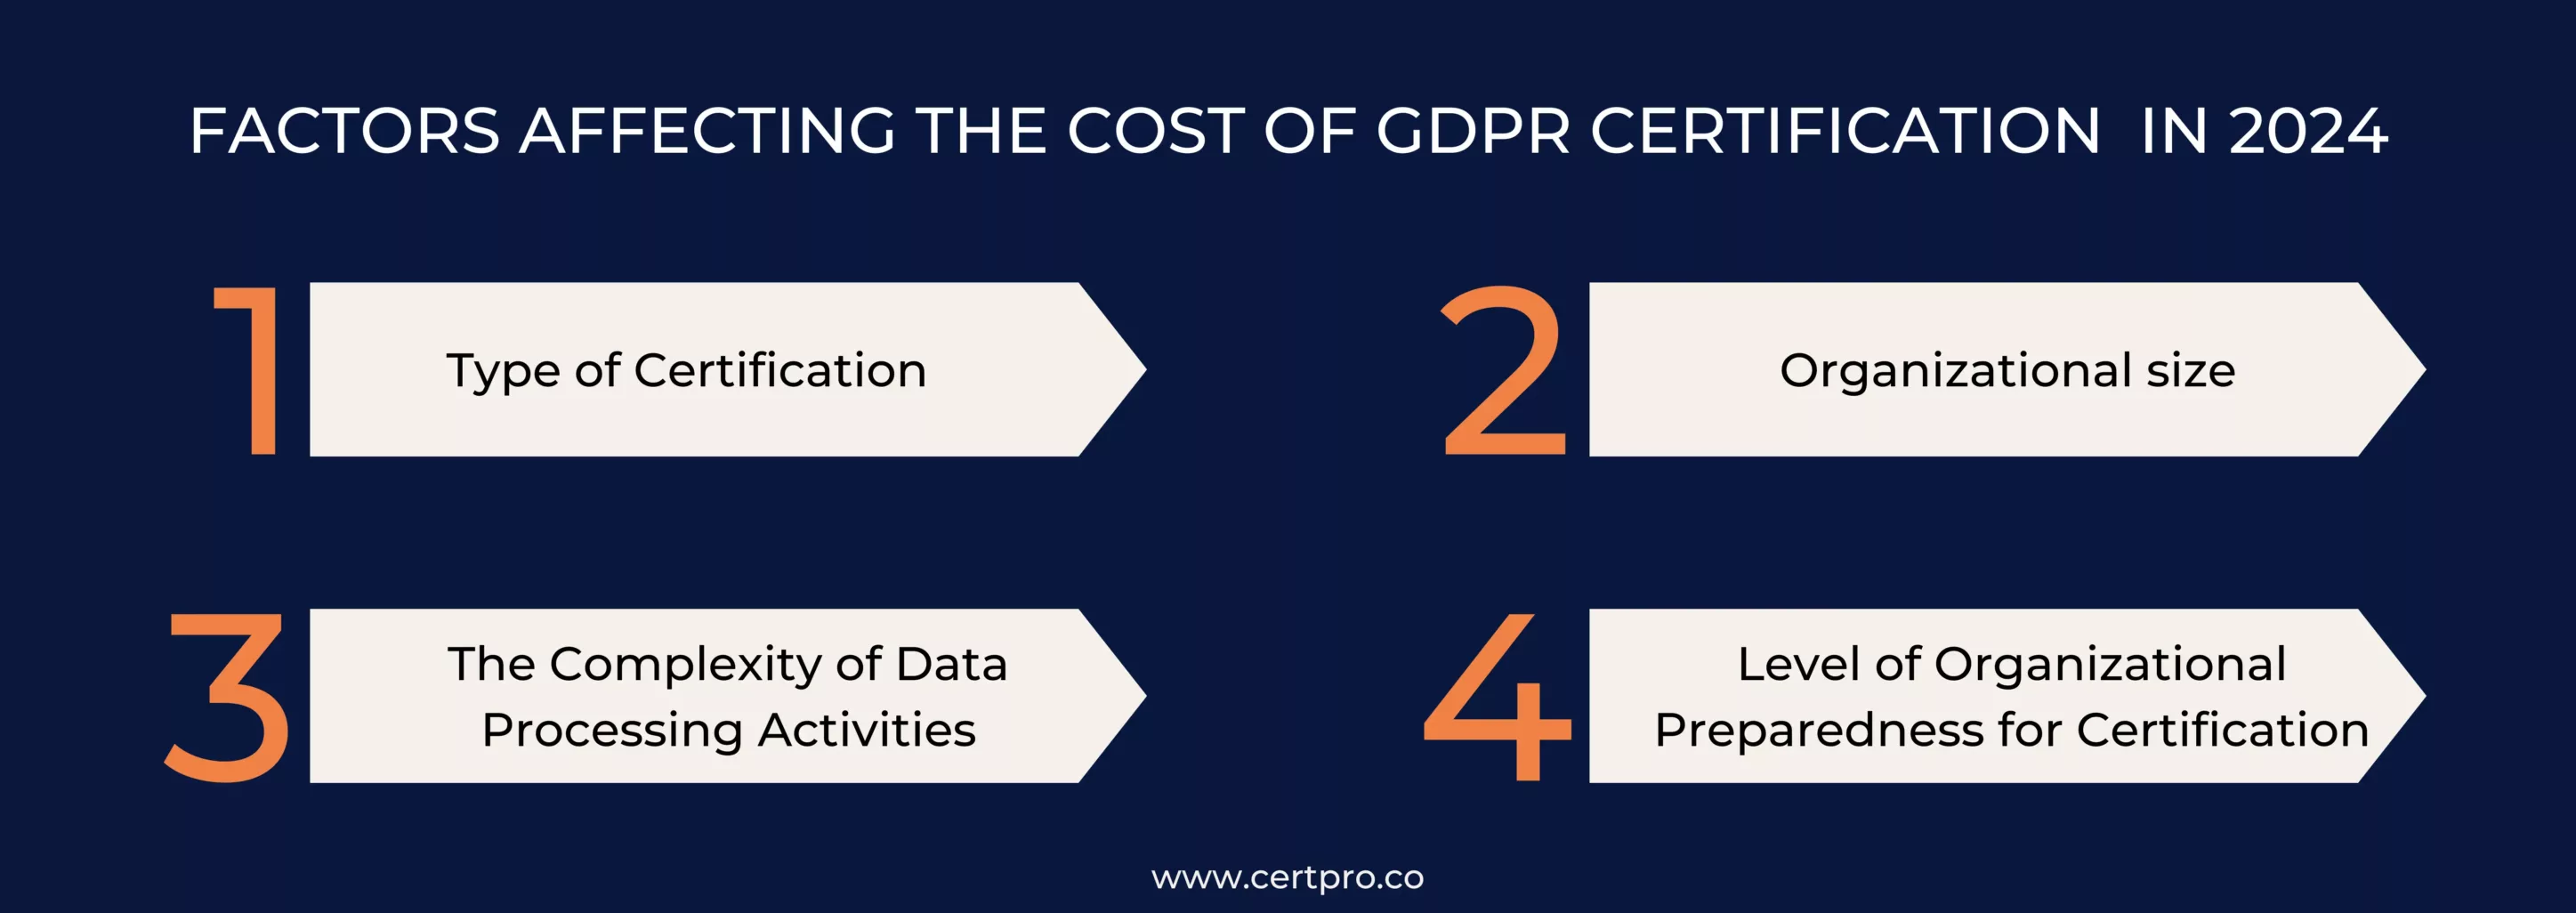 FACTORS AFFECTING THE COST OF GDPR CERTIFICATION IN 2024 fnl